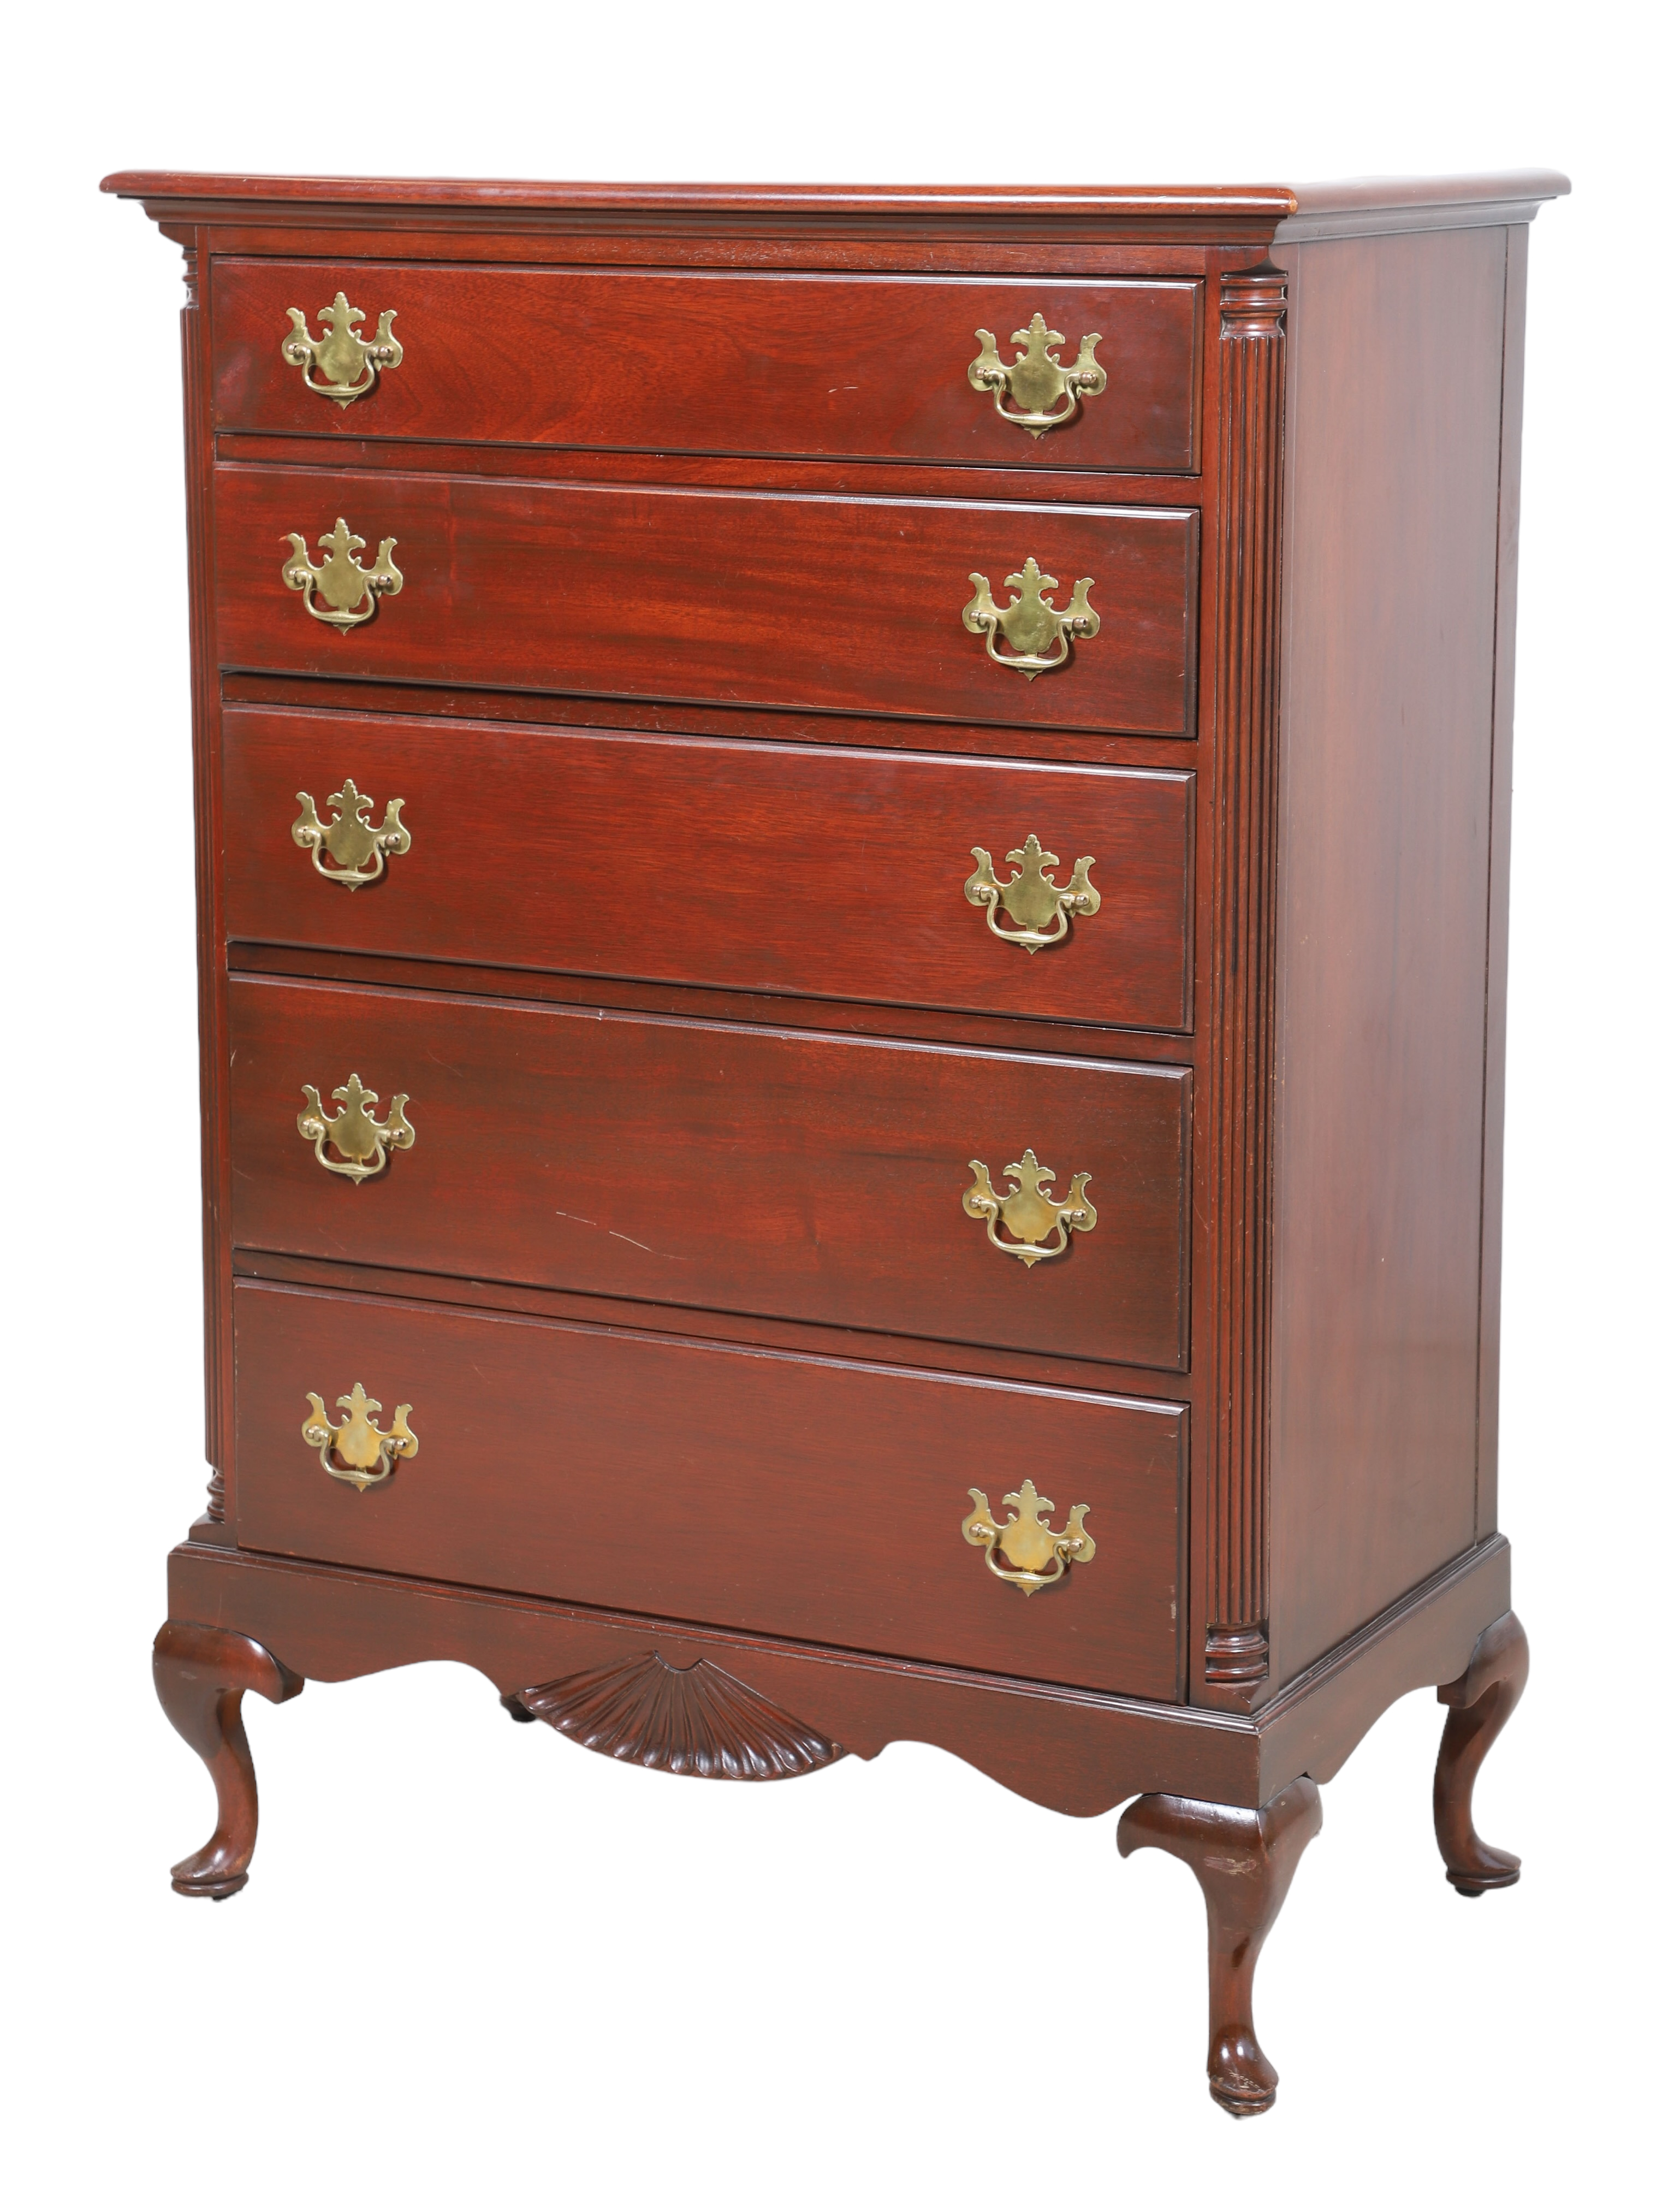 Queen Anne style mahogany high